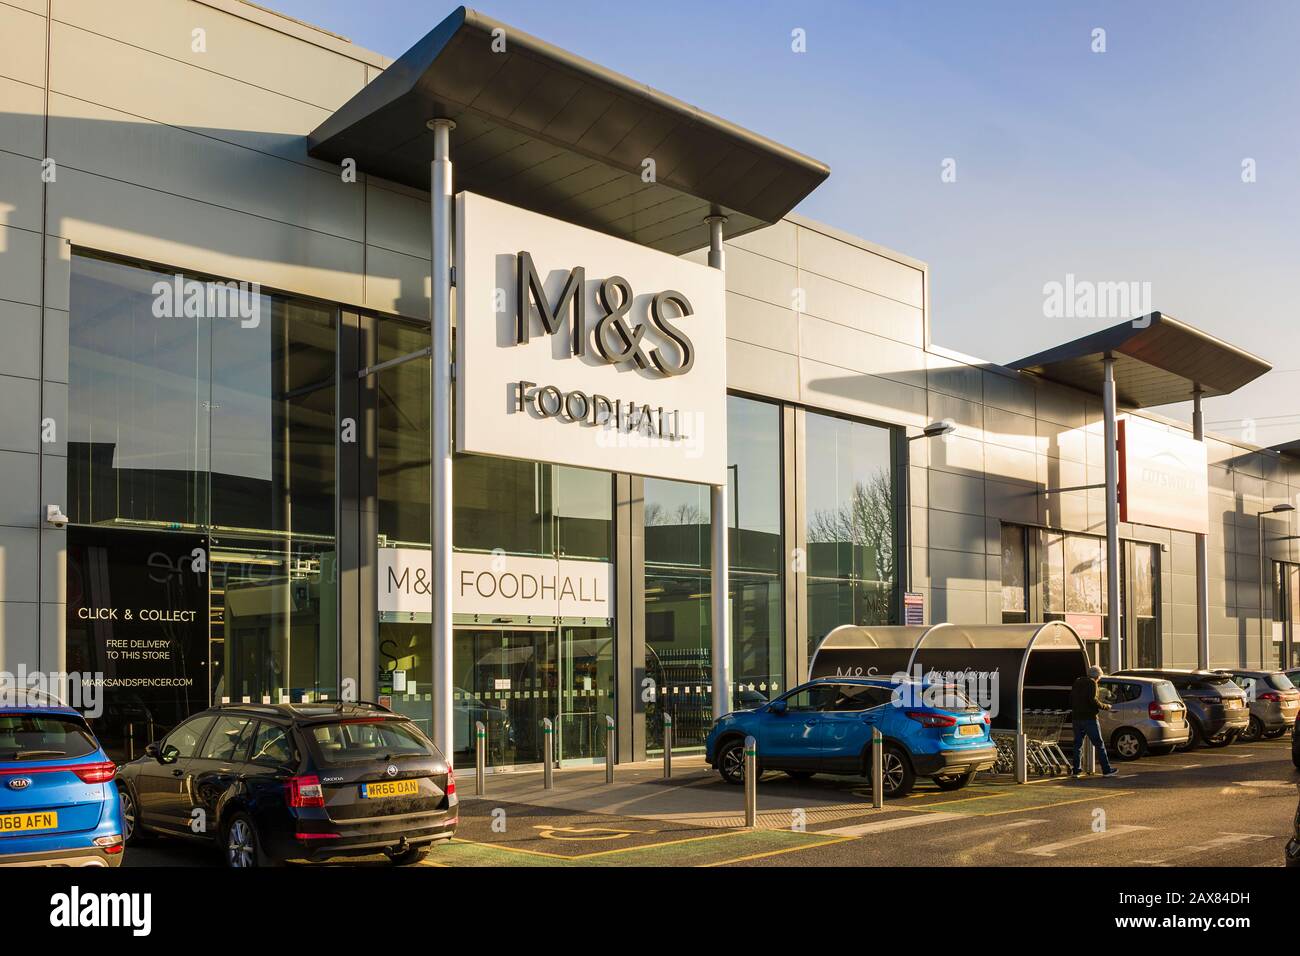 Entrance to the M & S Foodhall in Swindon Wiltshire England UK Stock Photo